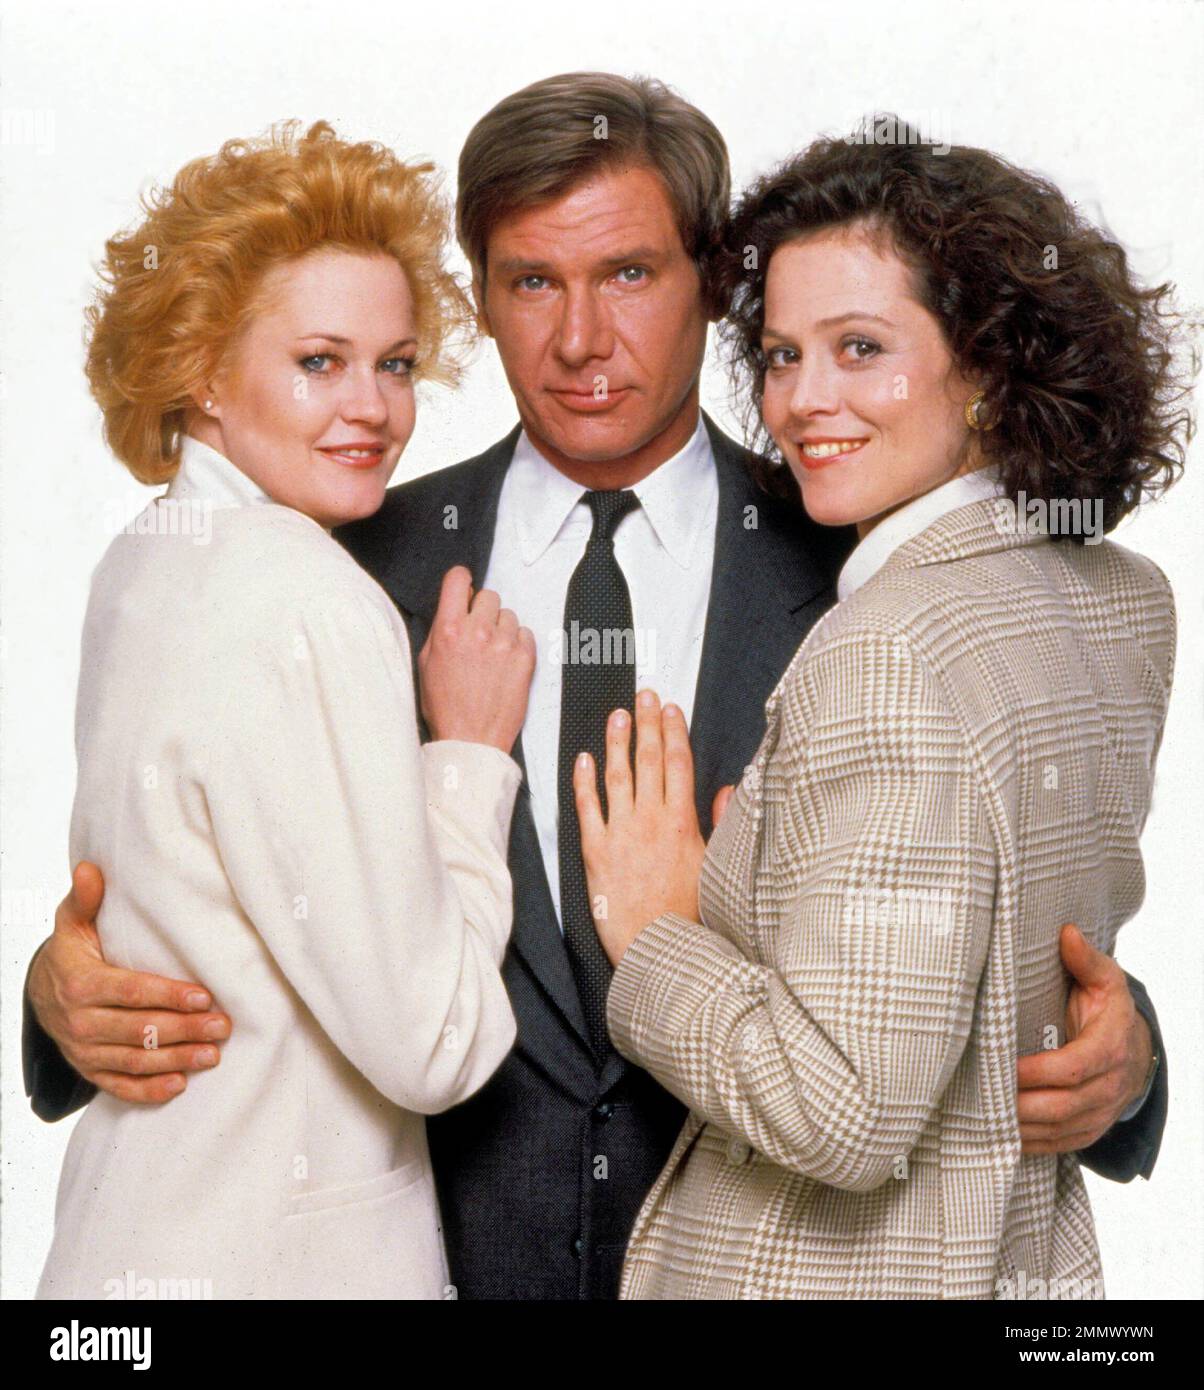 SIGOURNEY WEAVER, HARRISON FORD and MELANIE GRIFFITH in WORKING GIRL (1988), directed by MIKE NICHOLS. Credit: 20TH CENTURY FOX / Album Stock Photo